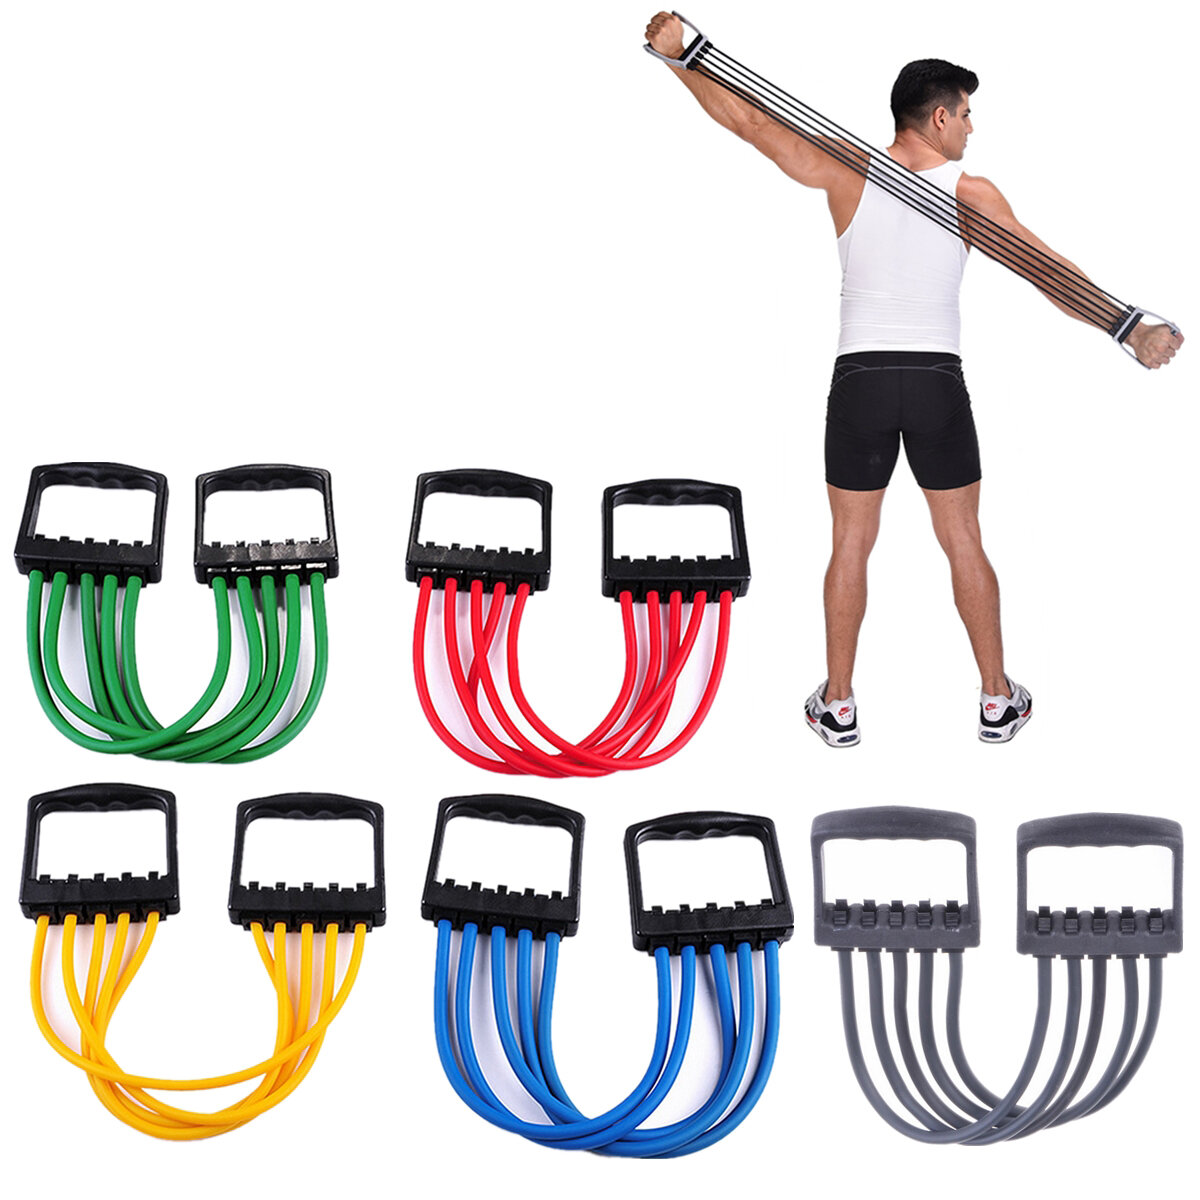 

5 Spring Ajustable Arm Strength Trainer Gym Fitness Rubber Chest Expander Exercise Resistance Bands for Home Fitness